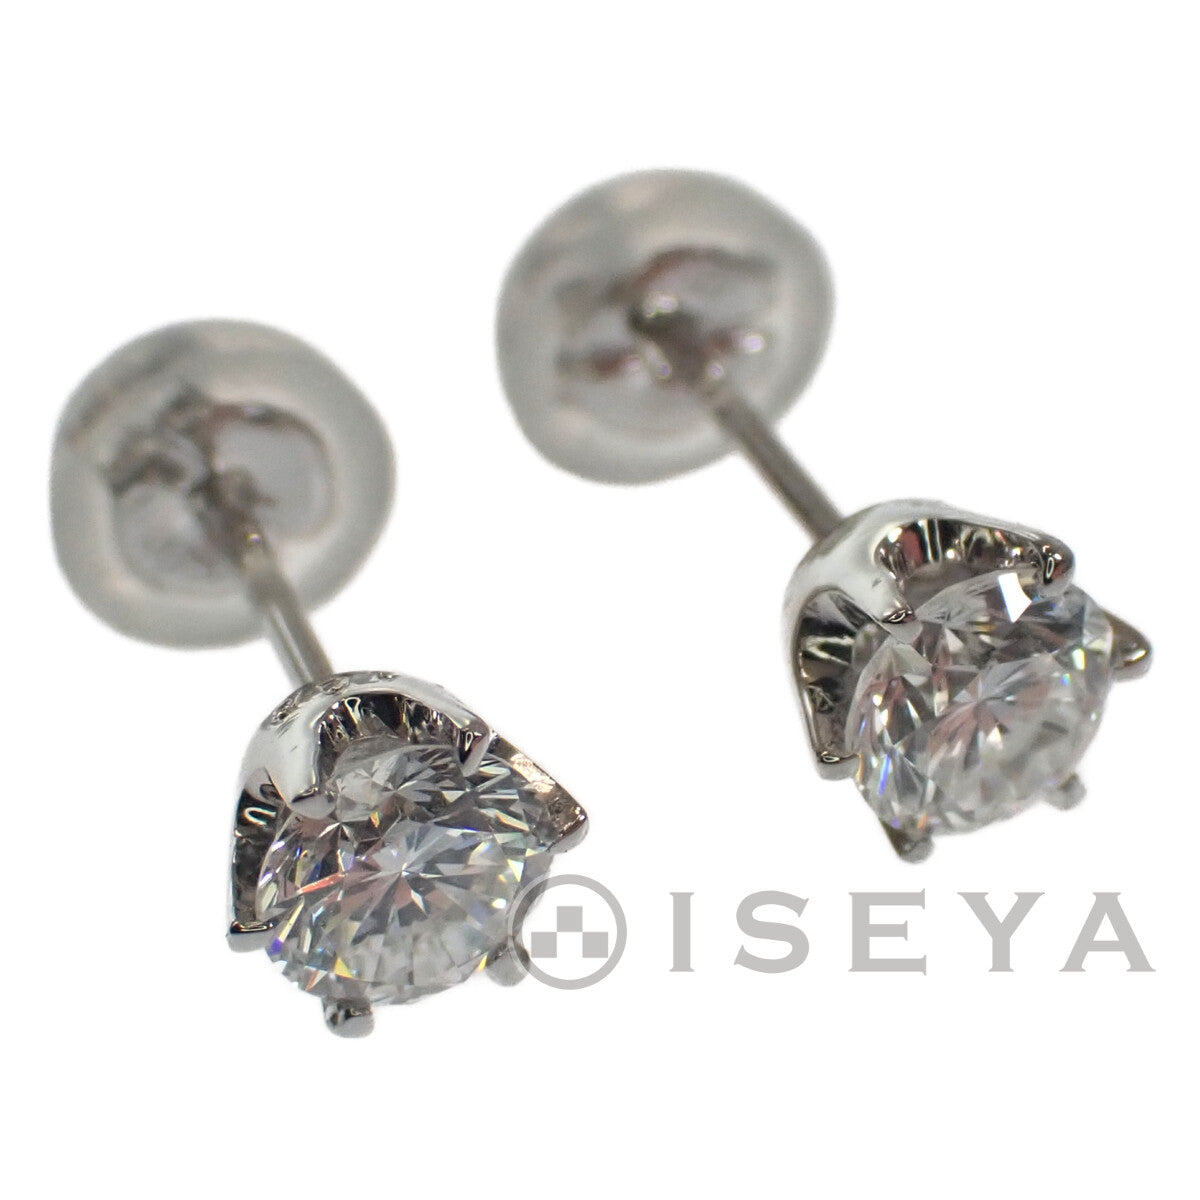 LuxUness  Stylish Pt900 Diamond Stud Earrings 0.351 0.322ct, Ladies Silver - 434872 in Excellent condition